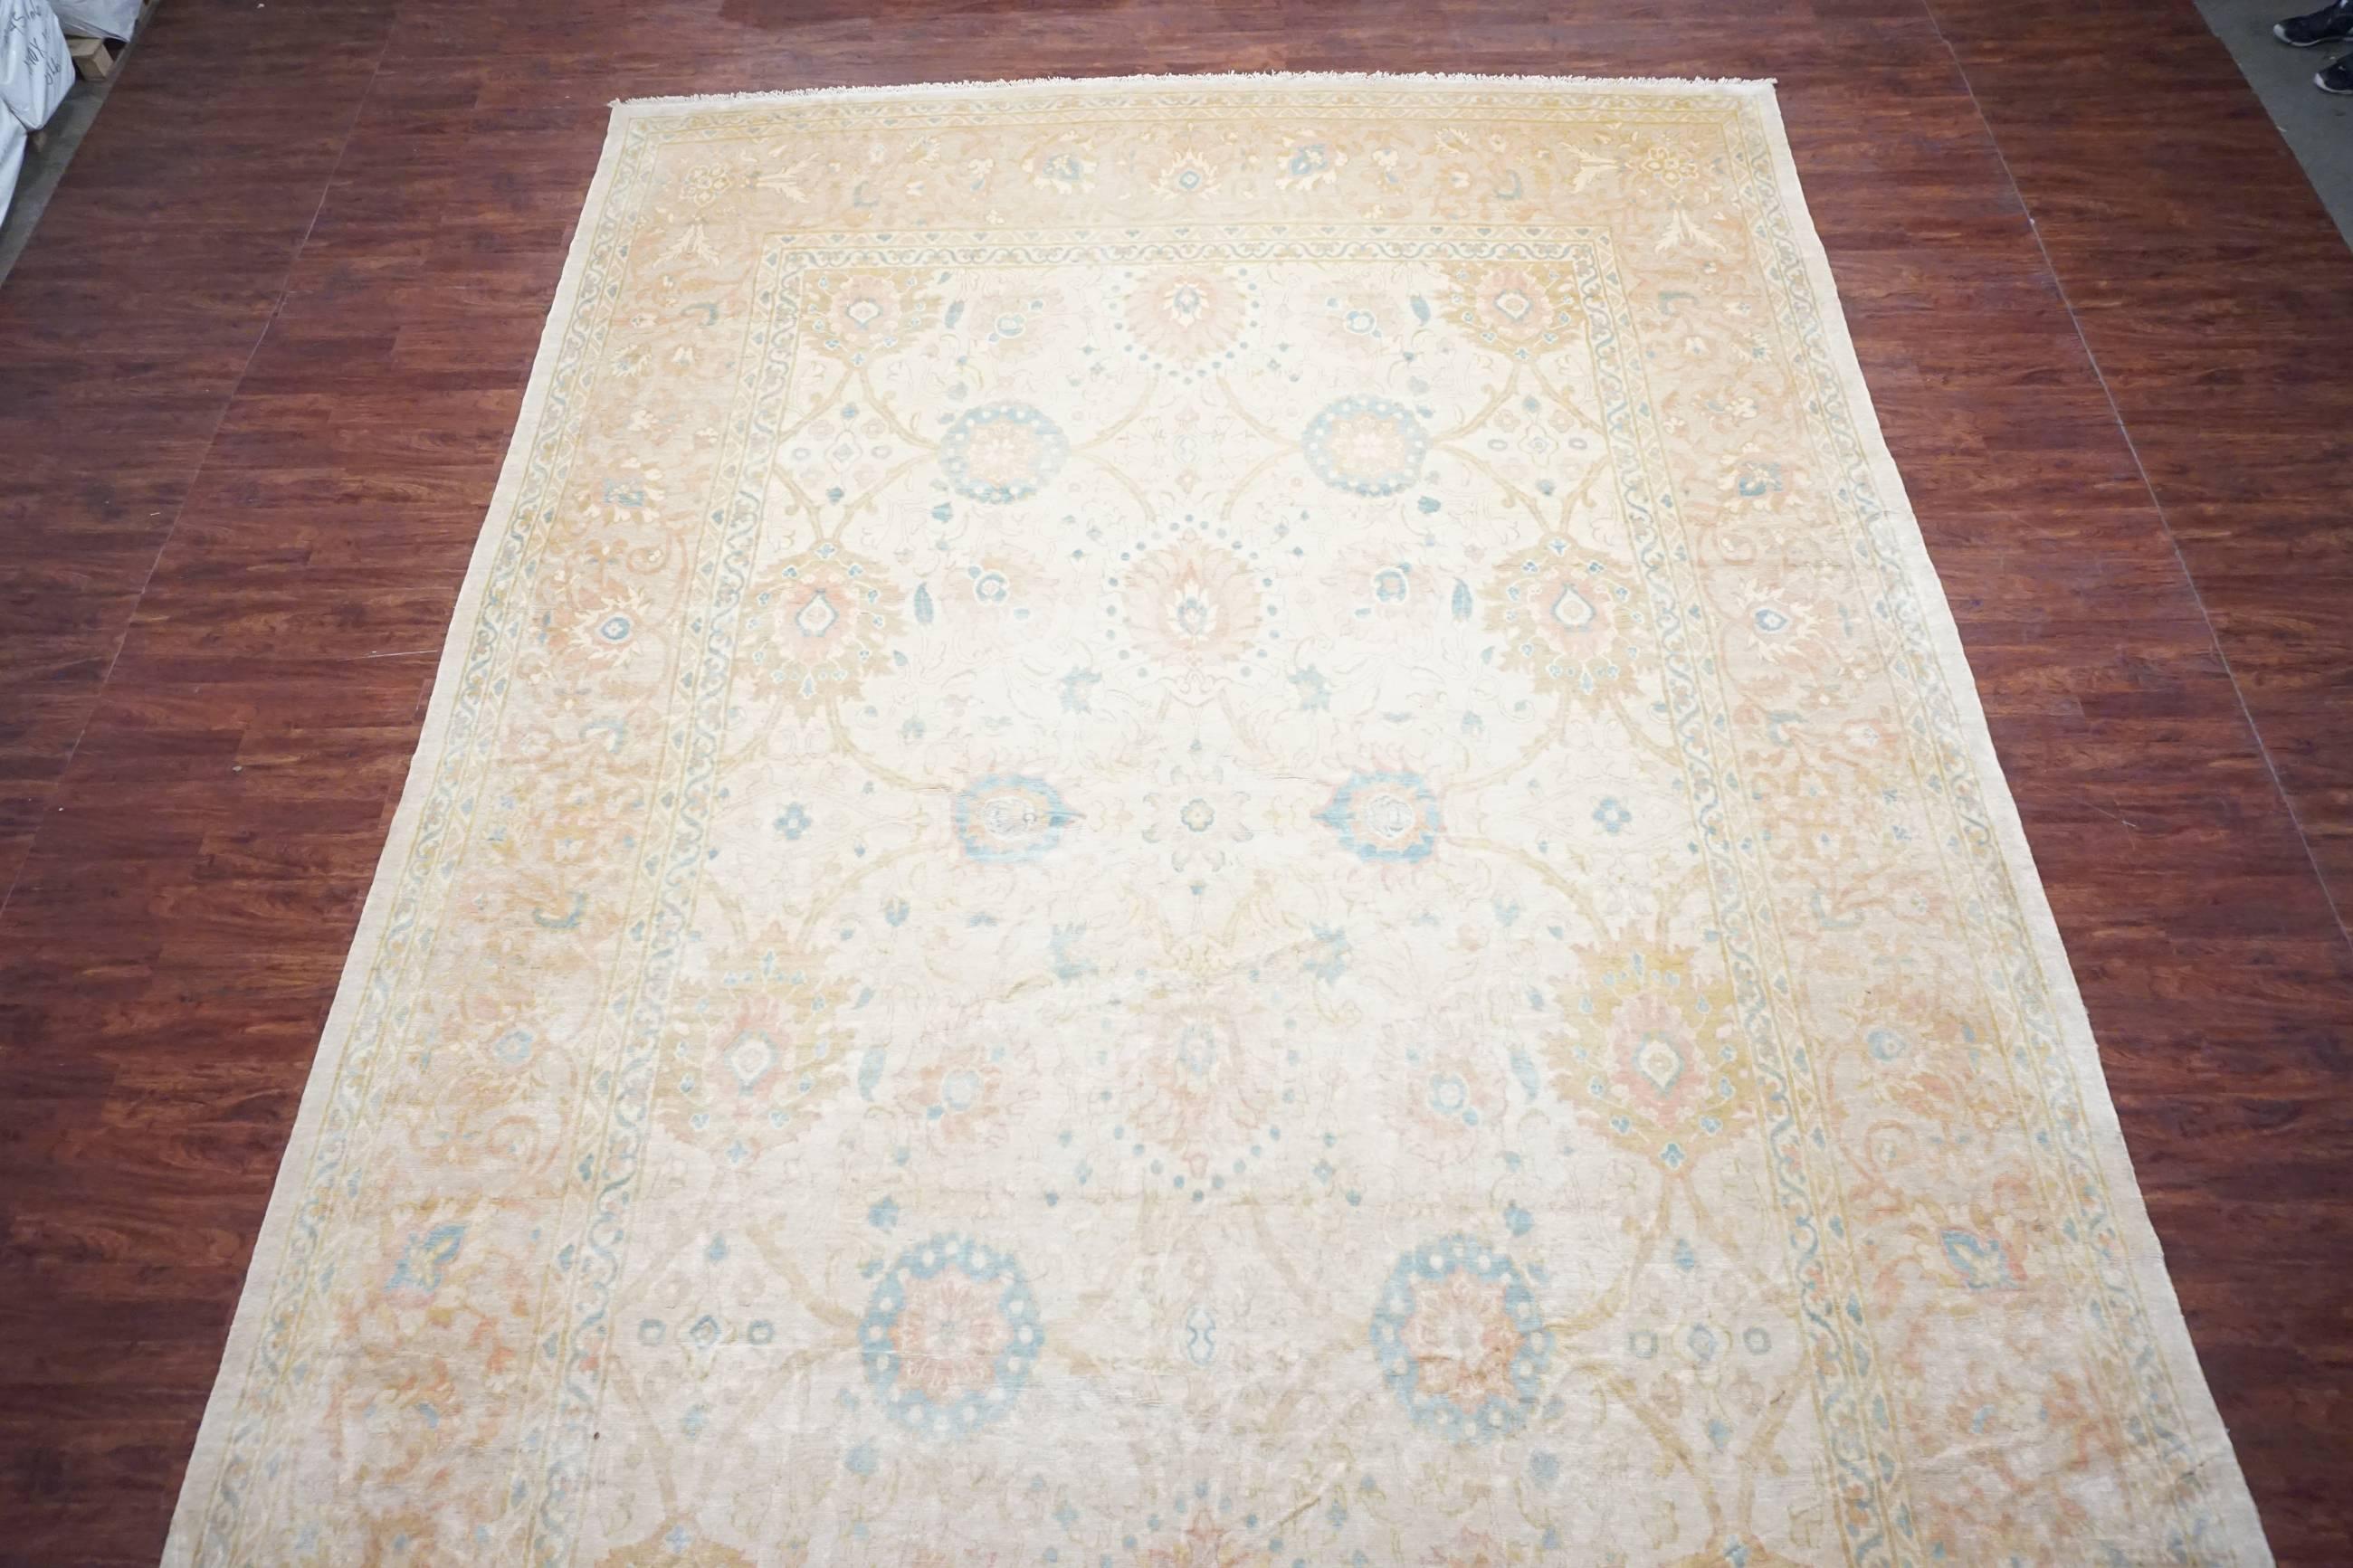 Hand-Knotted wool Oushak rug

circa 1990

Measures: 12' 9